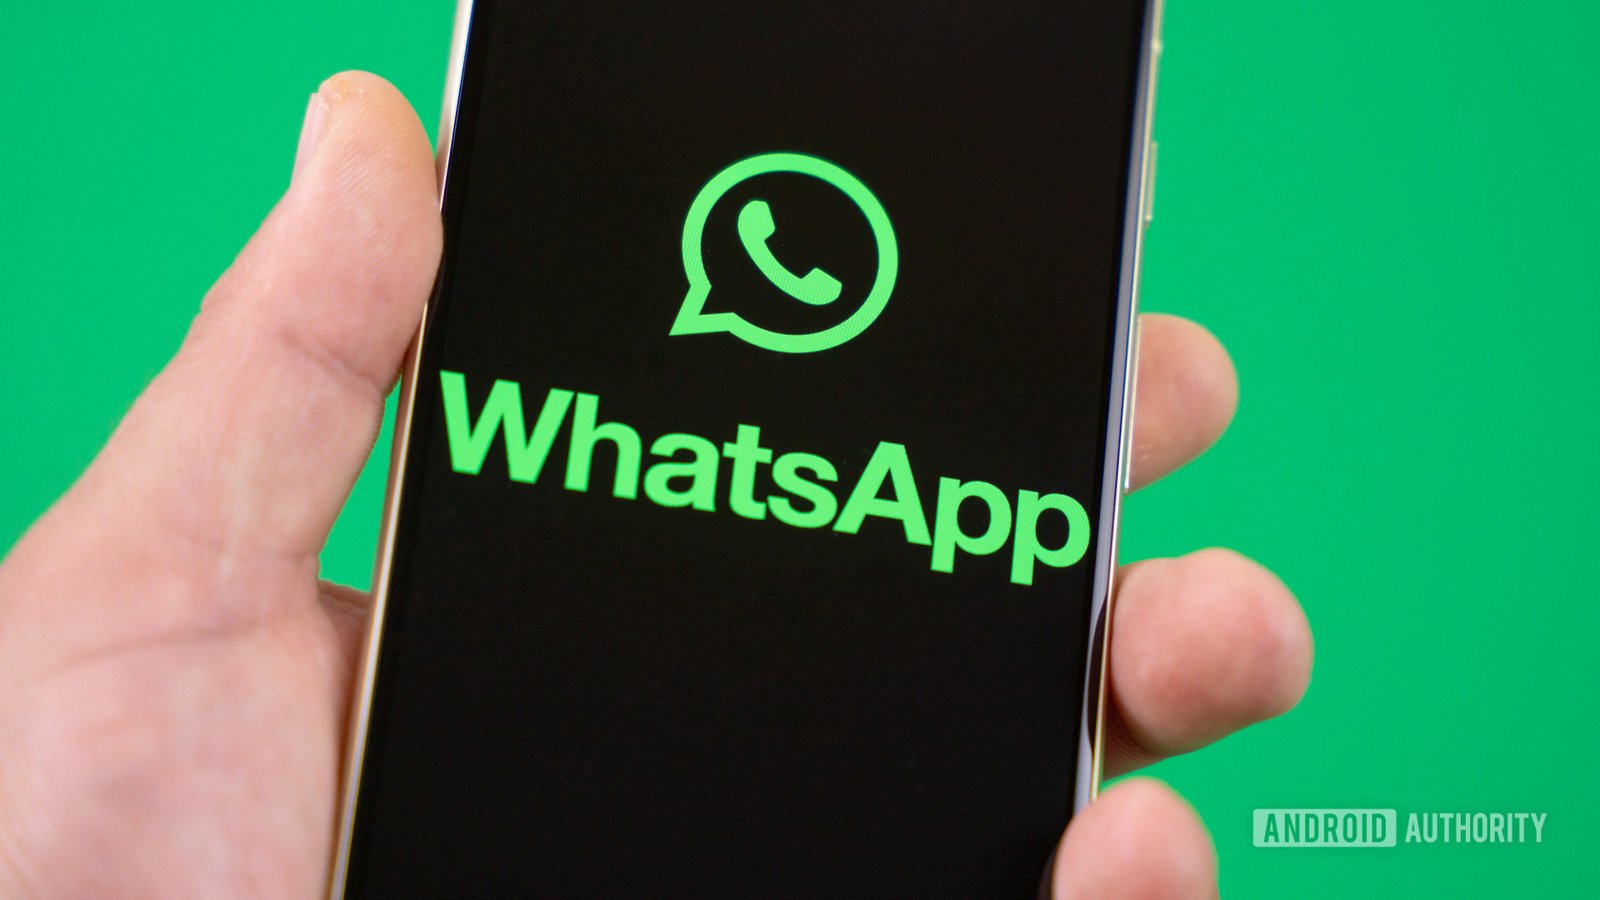 WhatsApp now lets you pin multiple messages for easy chat navigation